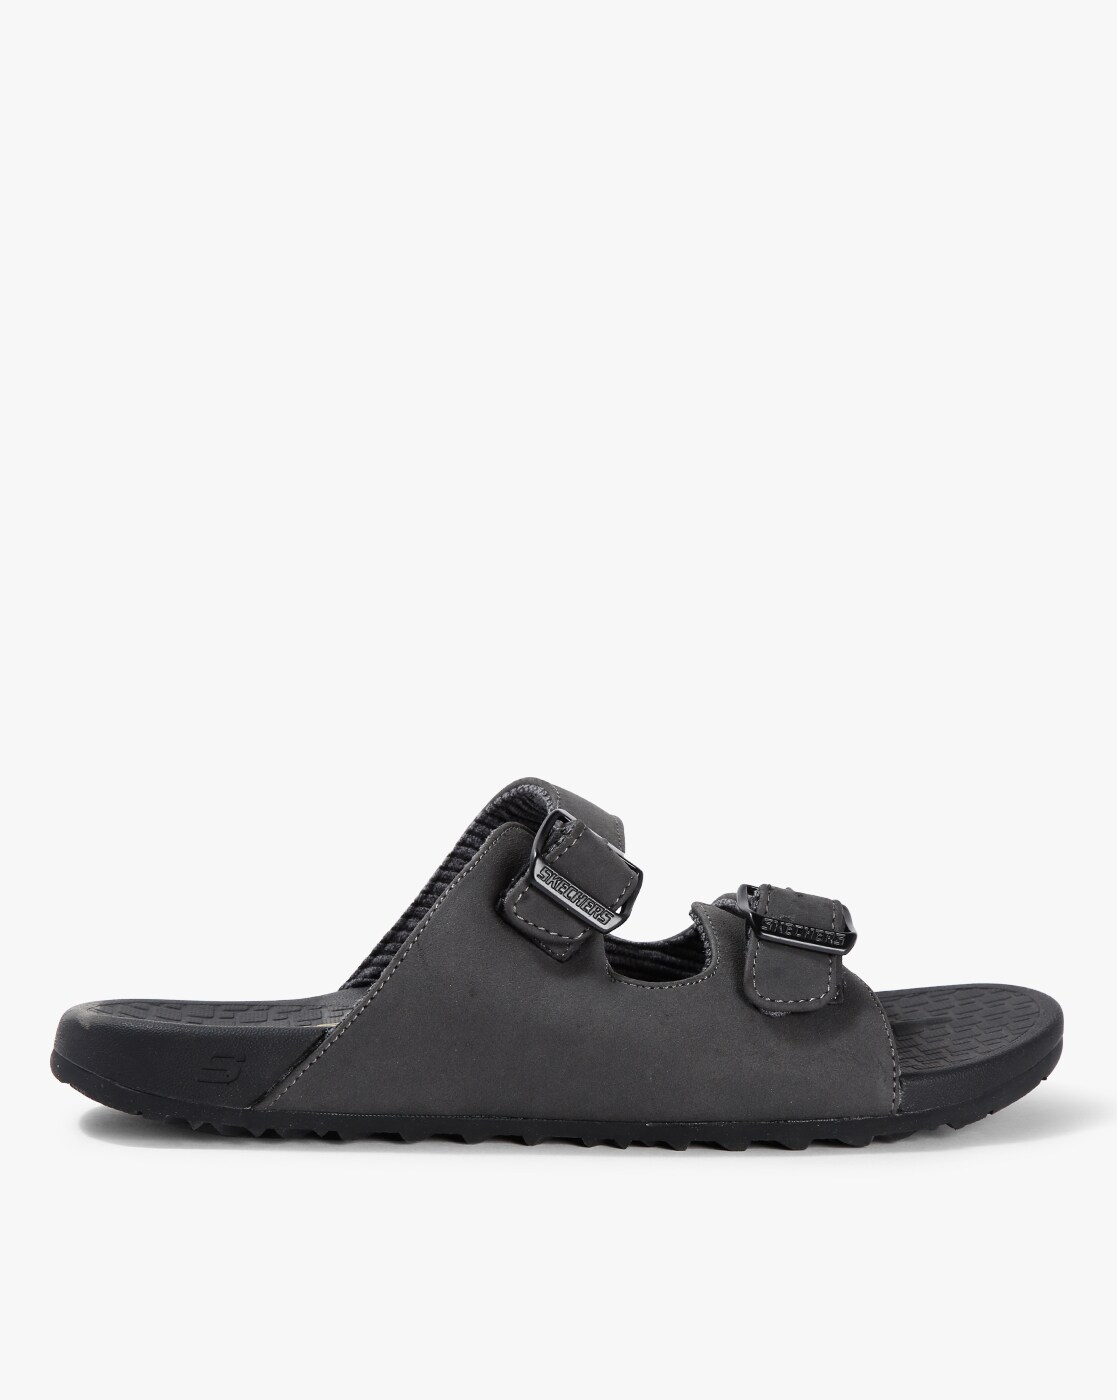 Buy Black Sports Sandals for Men by 